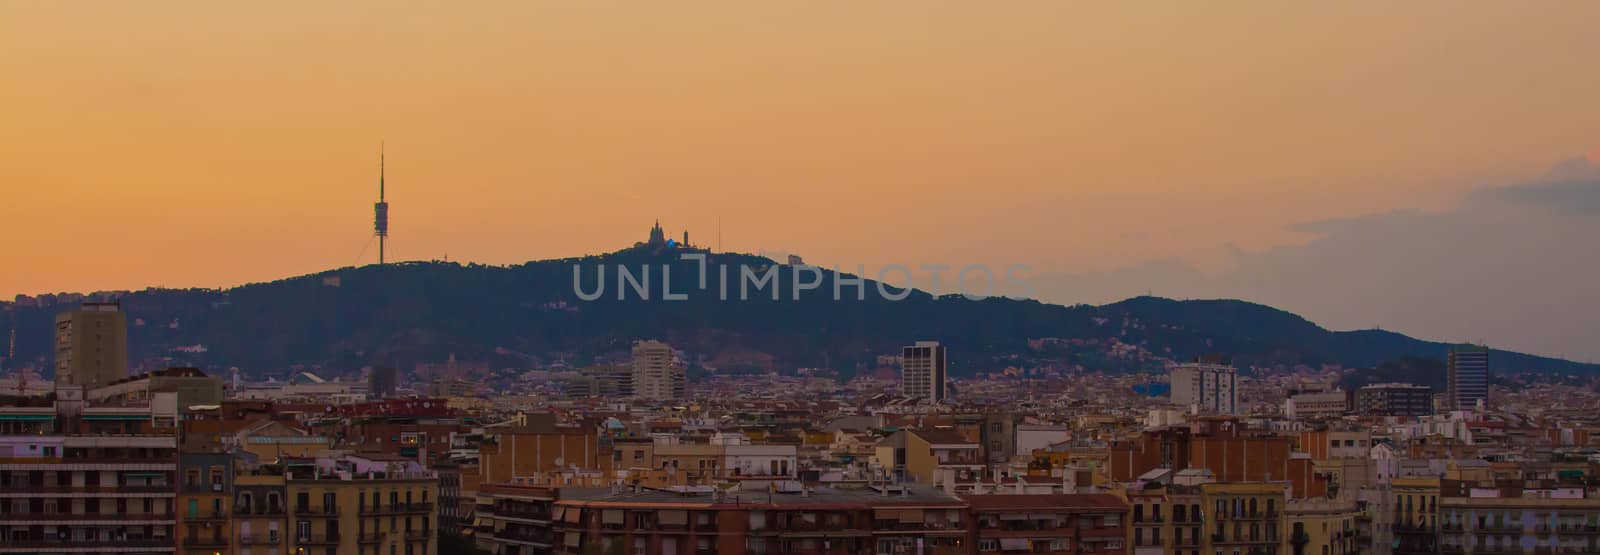 Panorama of Barcelona skyline, with buildings in the foreground and mountains in the background, at sunset